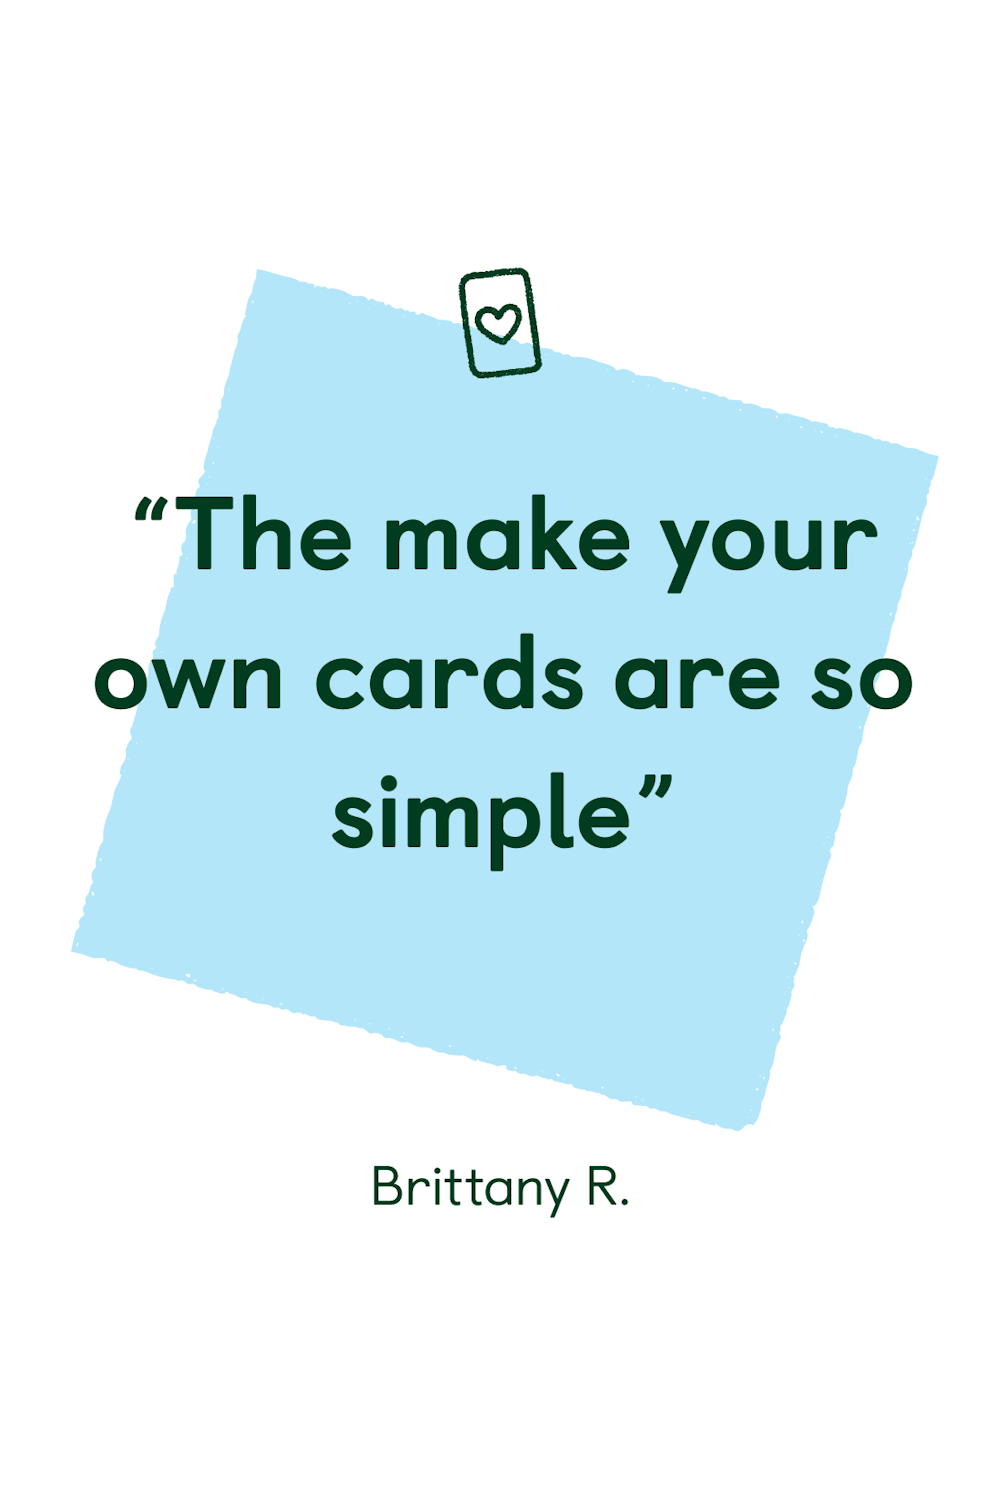 “The make your own cards are so simple”